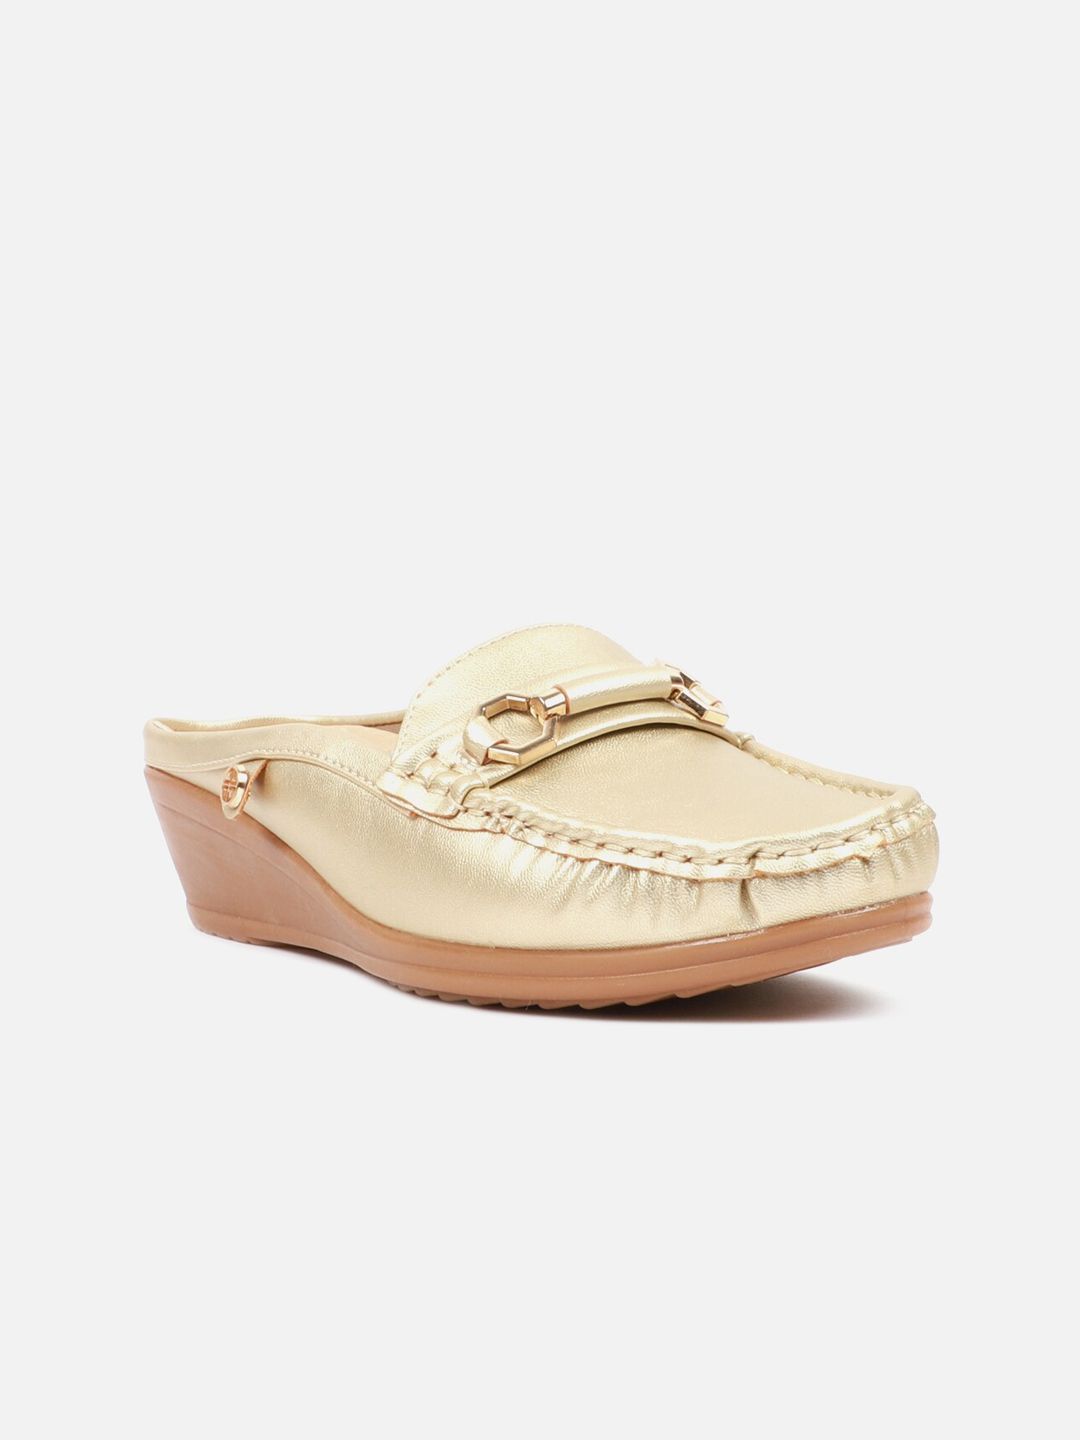 Carlton London Women Gold-Toned Loafers Price in India